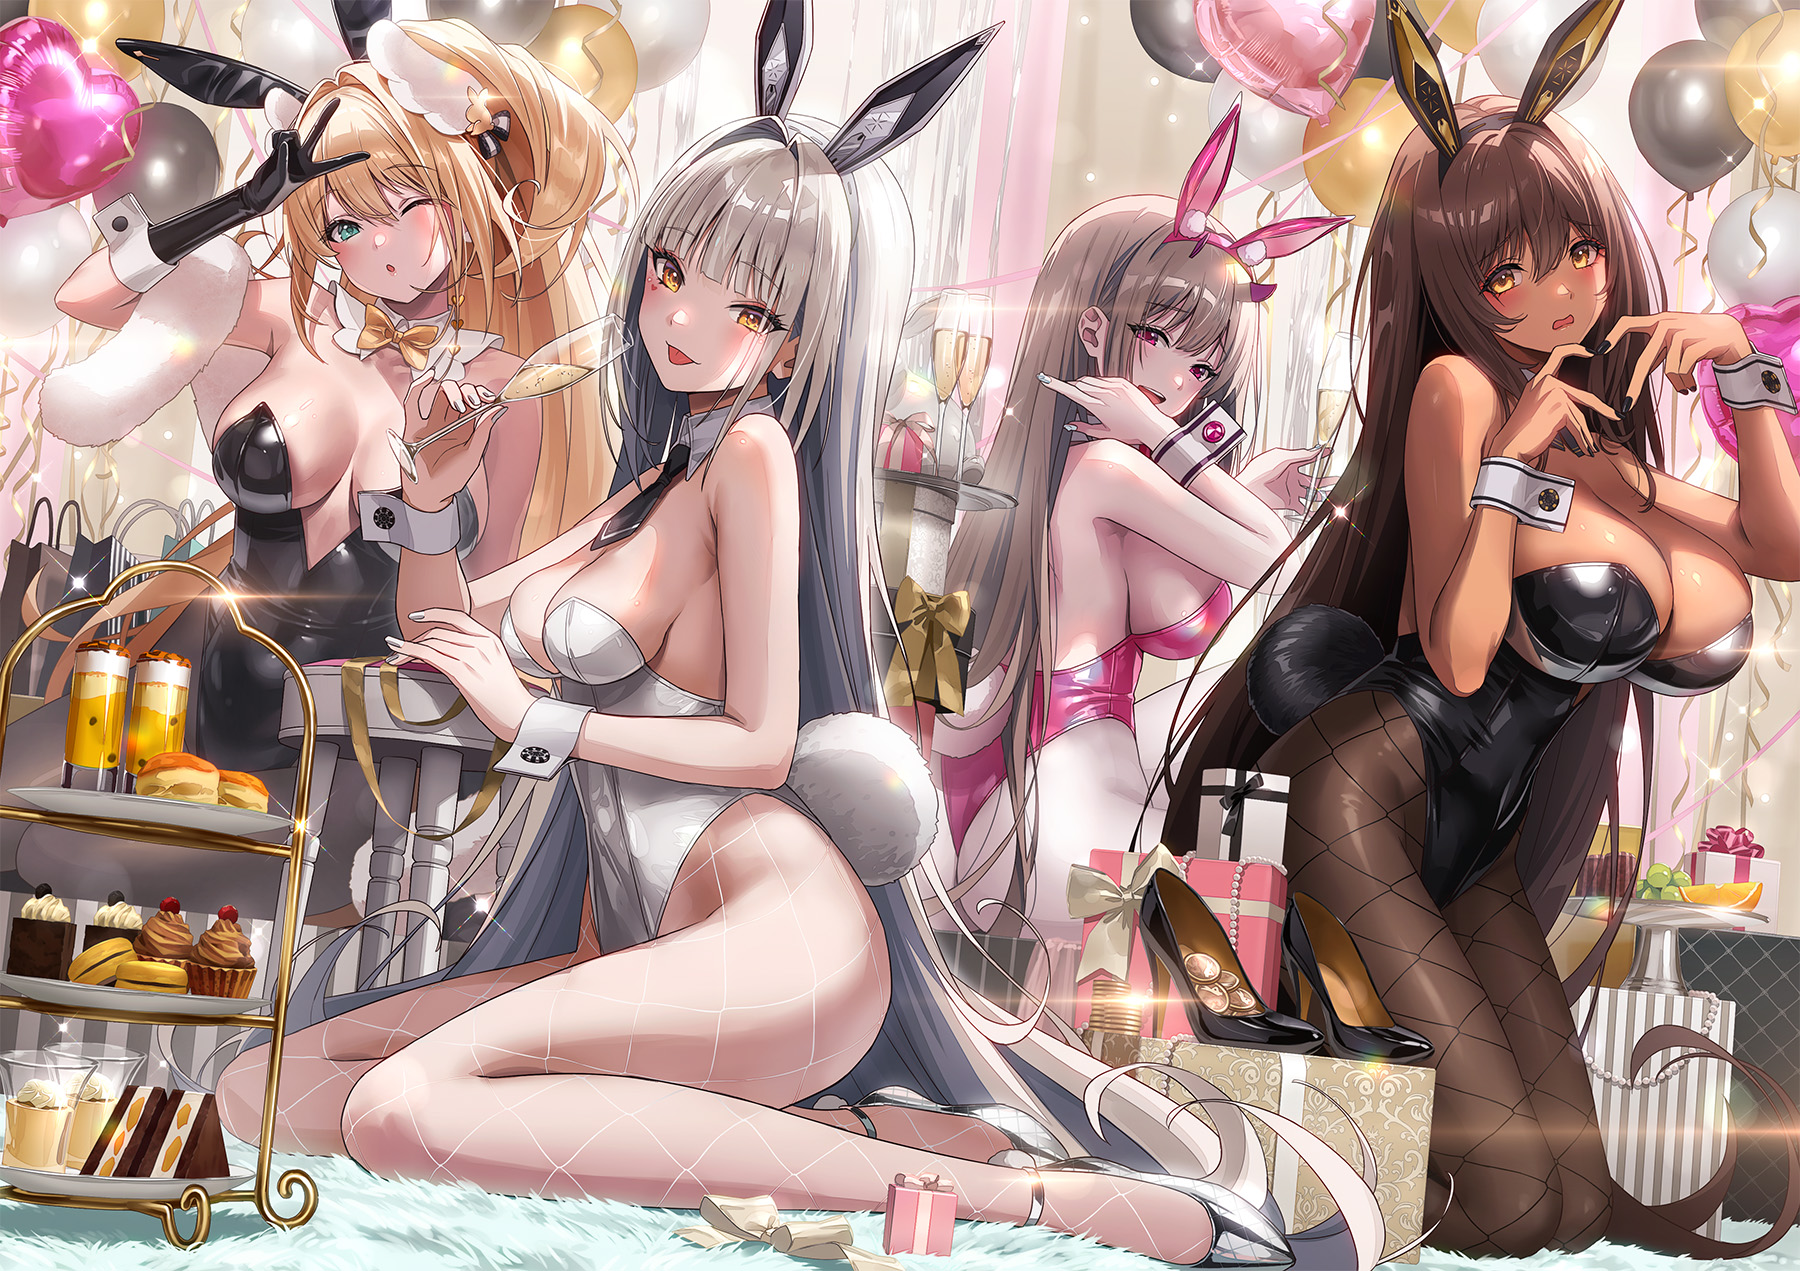 Anime 1800x1271 Nikke: The Goddess of Victory women quartet kneeling group of women long hair Blanc (Nikke) Noir (Nikke) Rupee (Nikke: The Goddess of Victory) Viper (Nikke: The Goddess Of Victory) looking at viewer cleavage peace sign hand gesture women indoors bunny tail bunny ears bare shoulders fishnet pantyhose leotard bunny suit looking back boobs one eye closed Sonsoso wristwatch wink animal ears champagne cake presents fishnet pastries wine glass thighs balloon cup anime girls tongue out